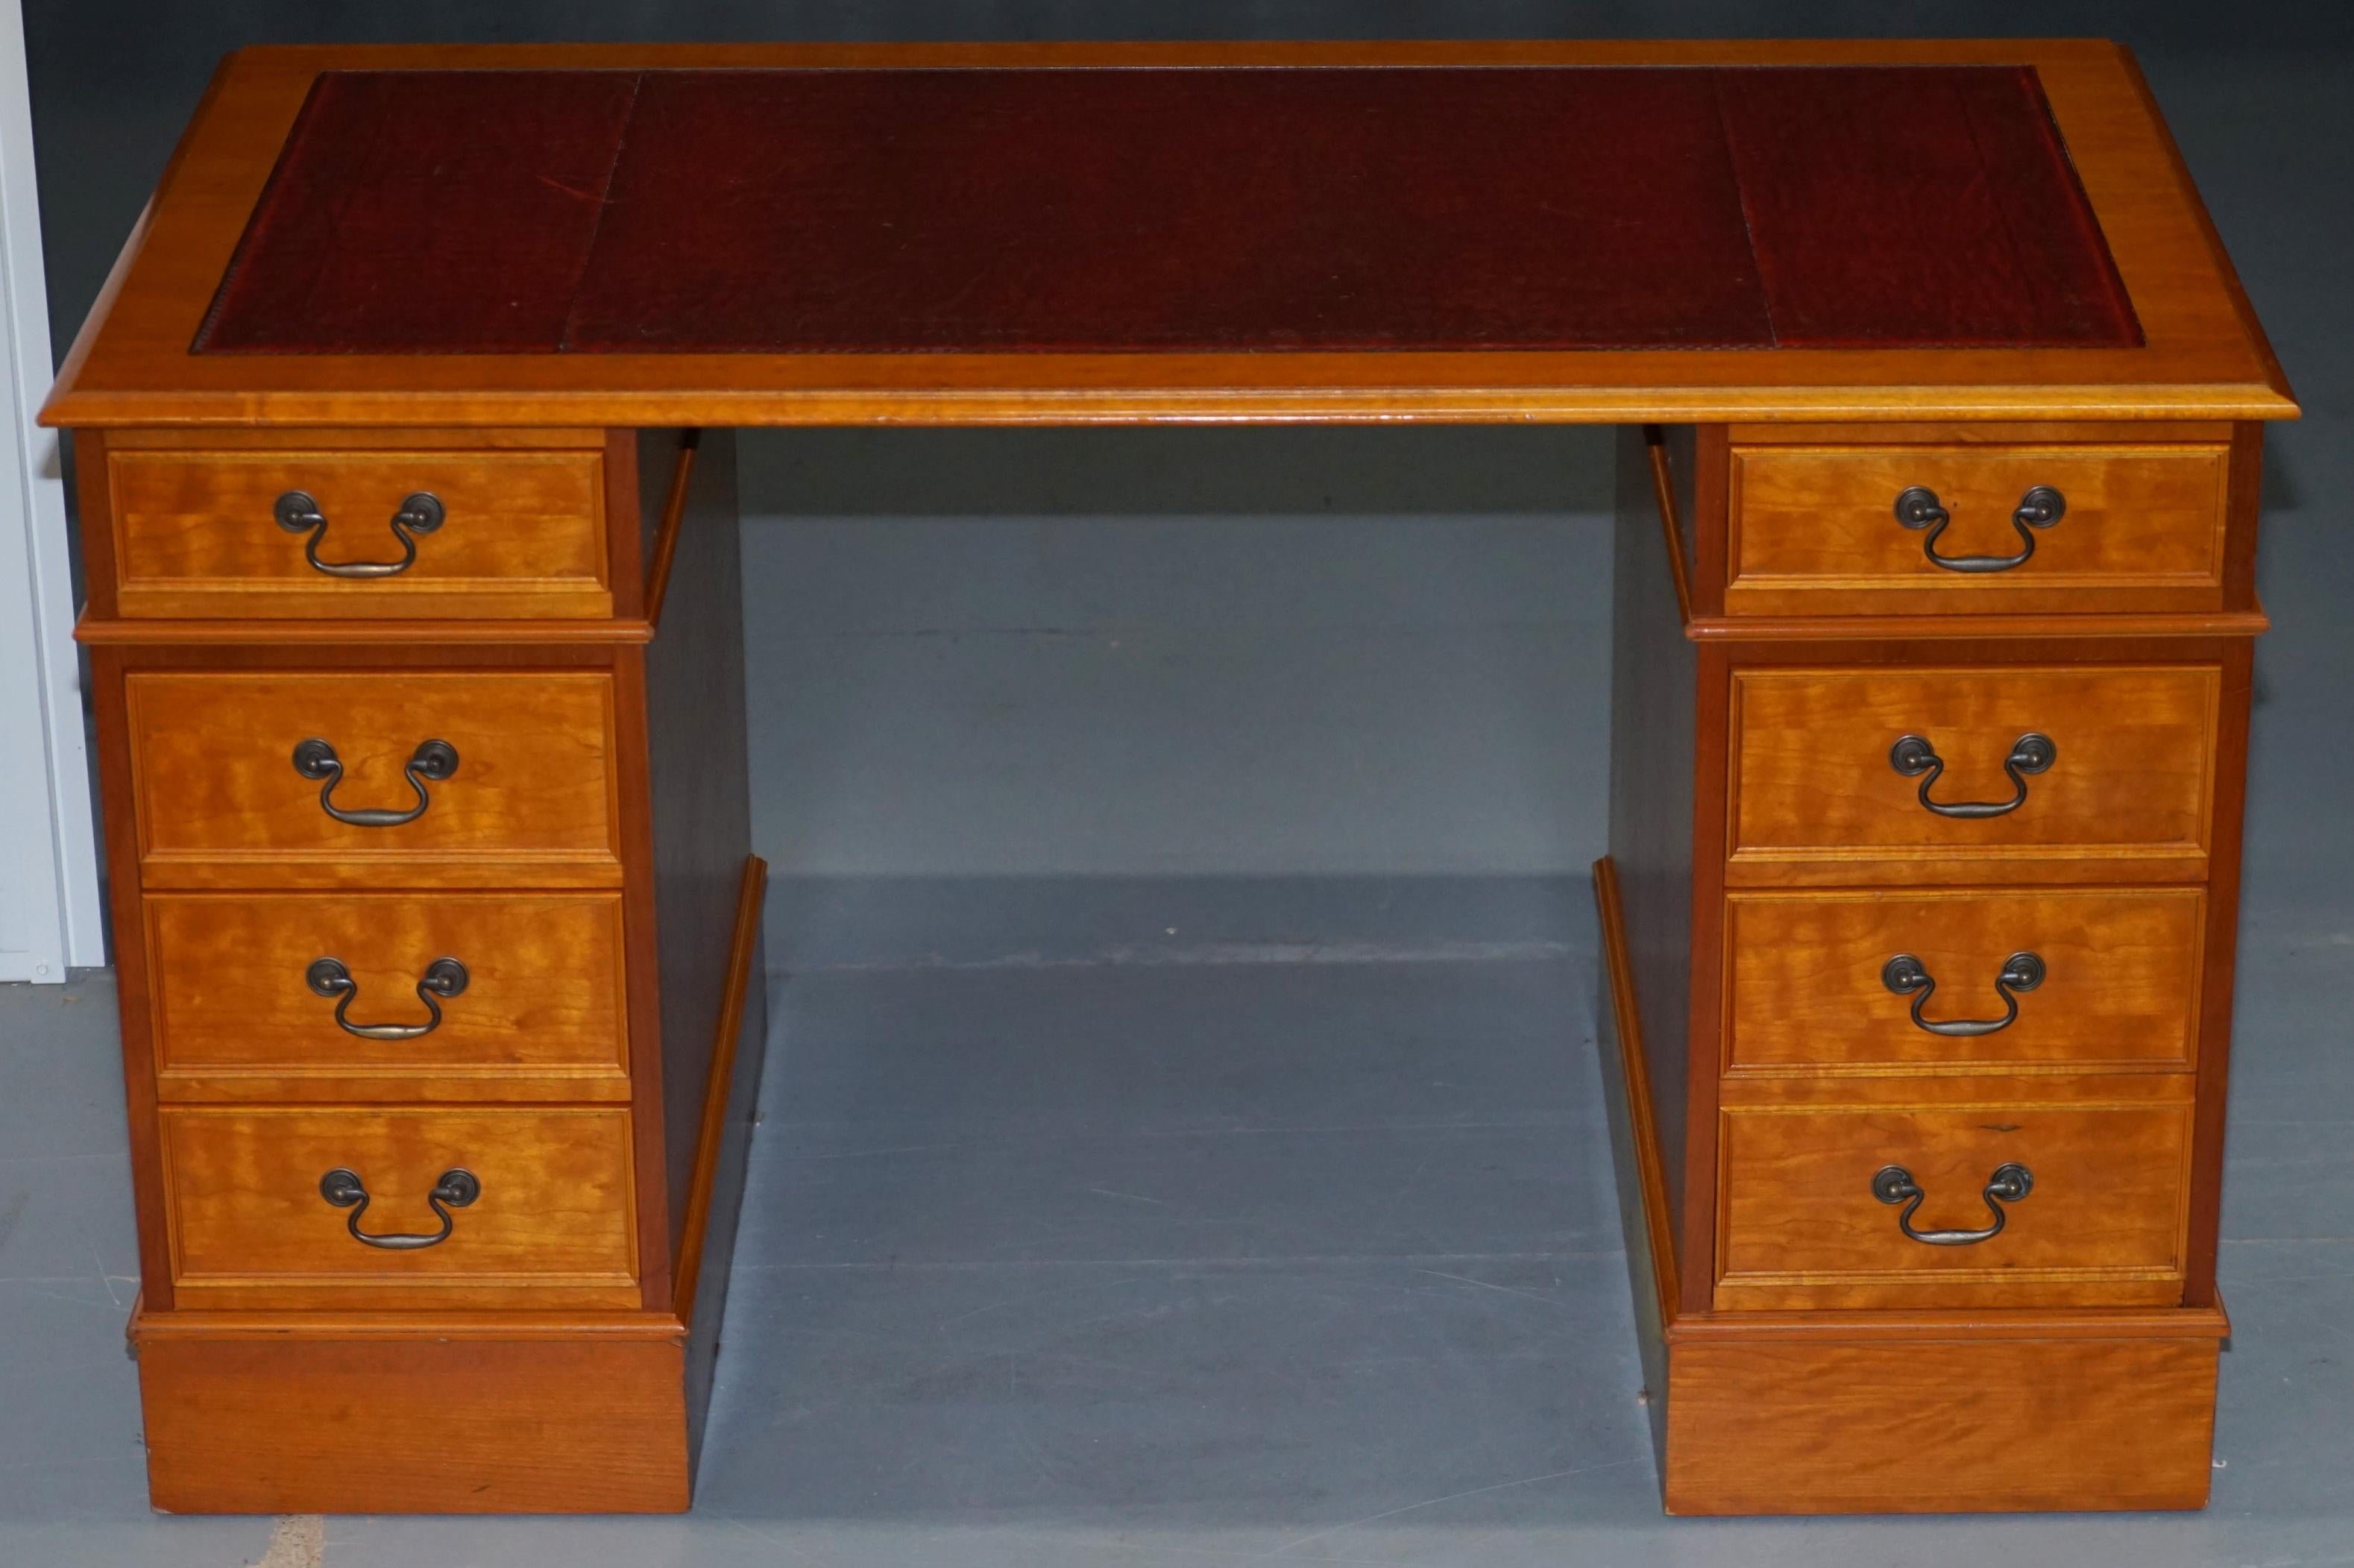 We are delighted to offer for sale this vintage twin pedestal partner desk finished in luxury yew wood with a oxblood leather gold leaf embossed top custom made with extra leg room space

A very good looking and well made desk with a lovely timber